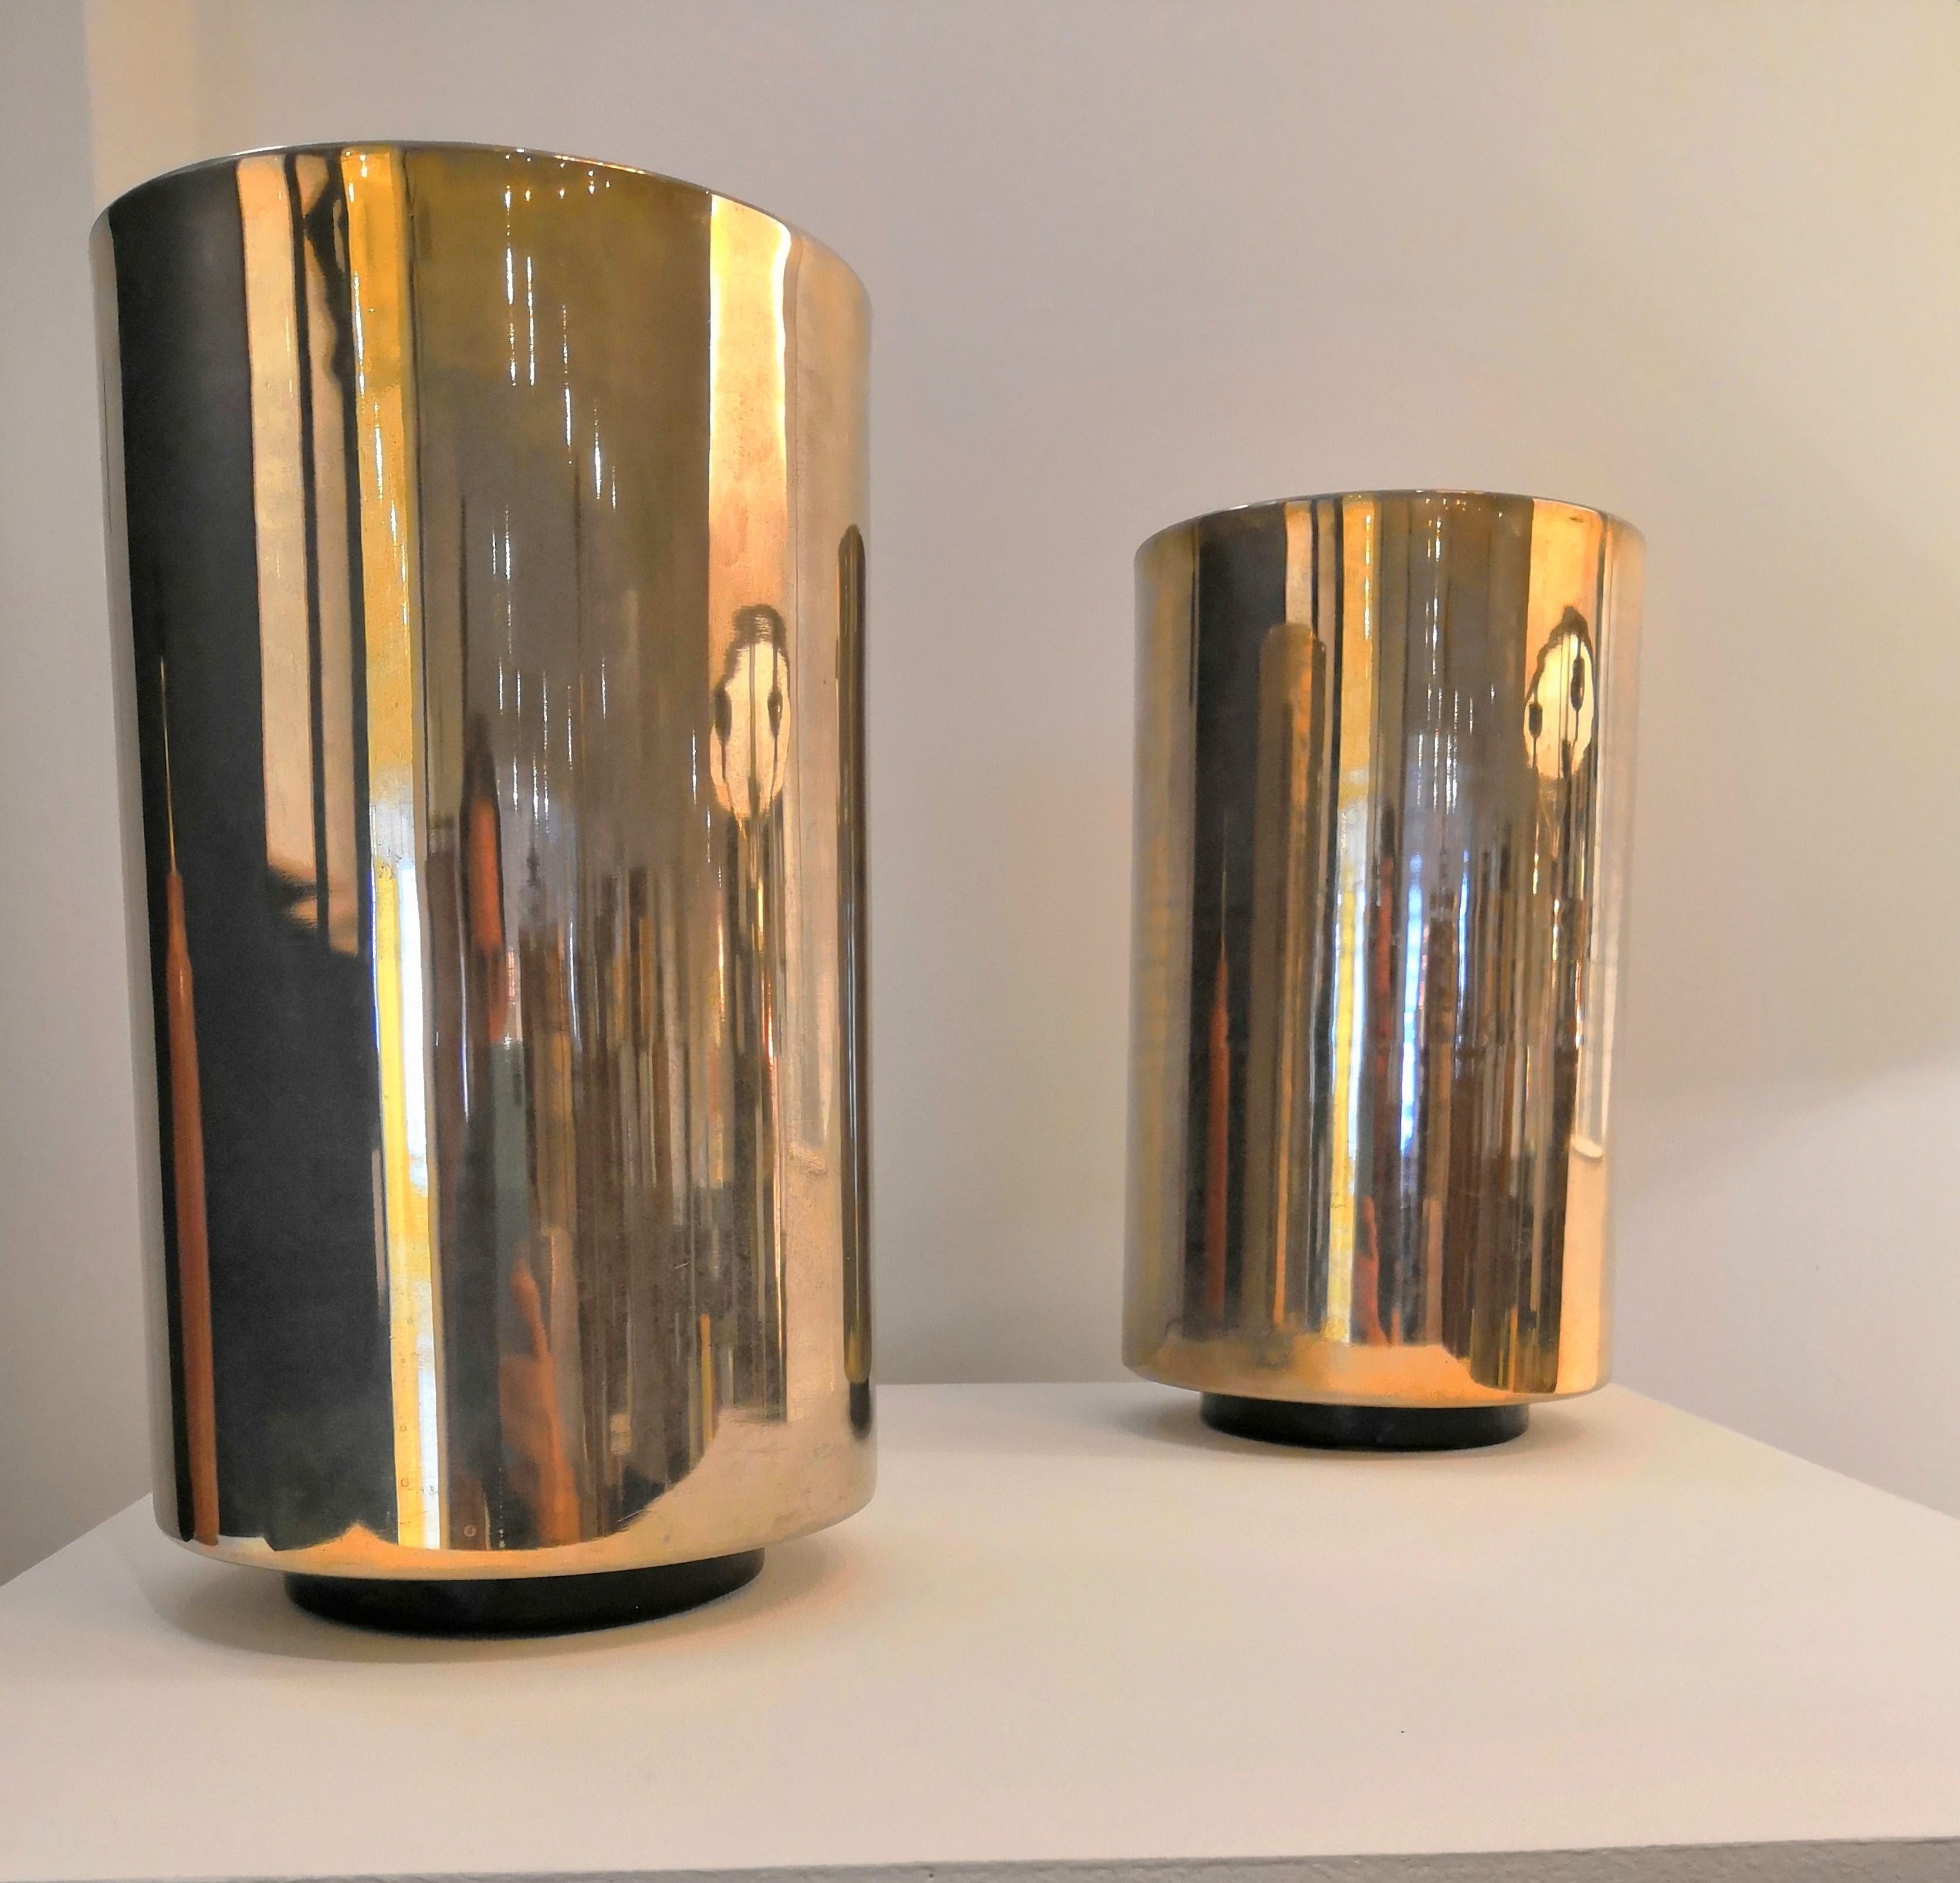 Pair of nickel-plated uplighters by Roger Nathan
Saint Germain Lumière
European socket and wiring
good vintage condition.